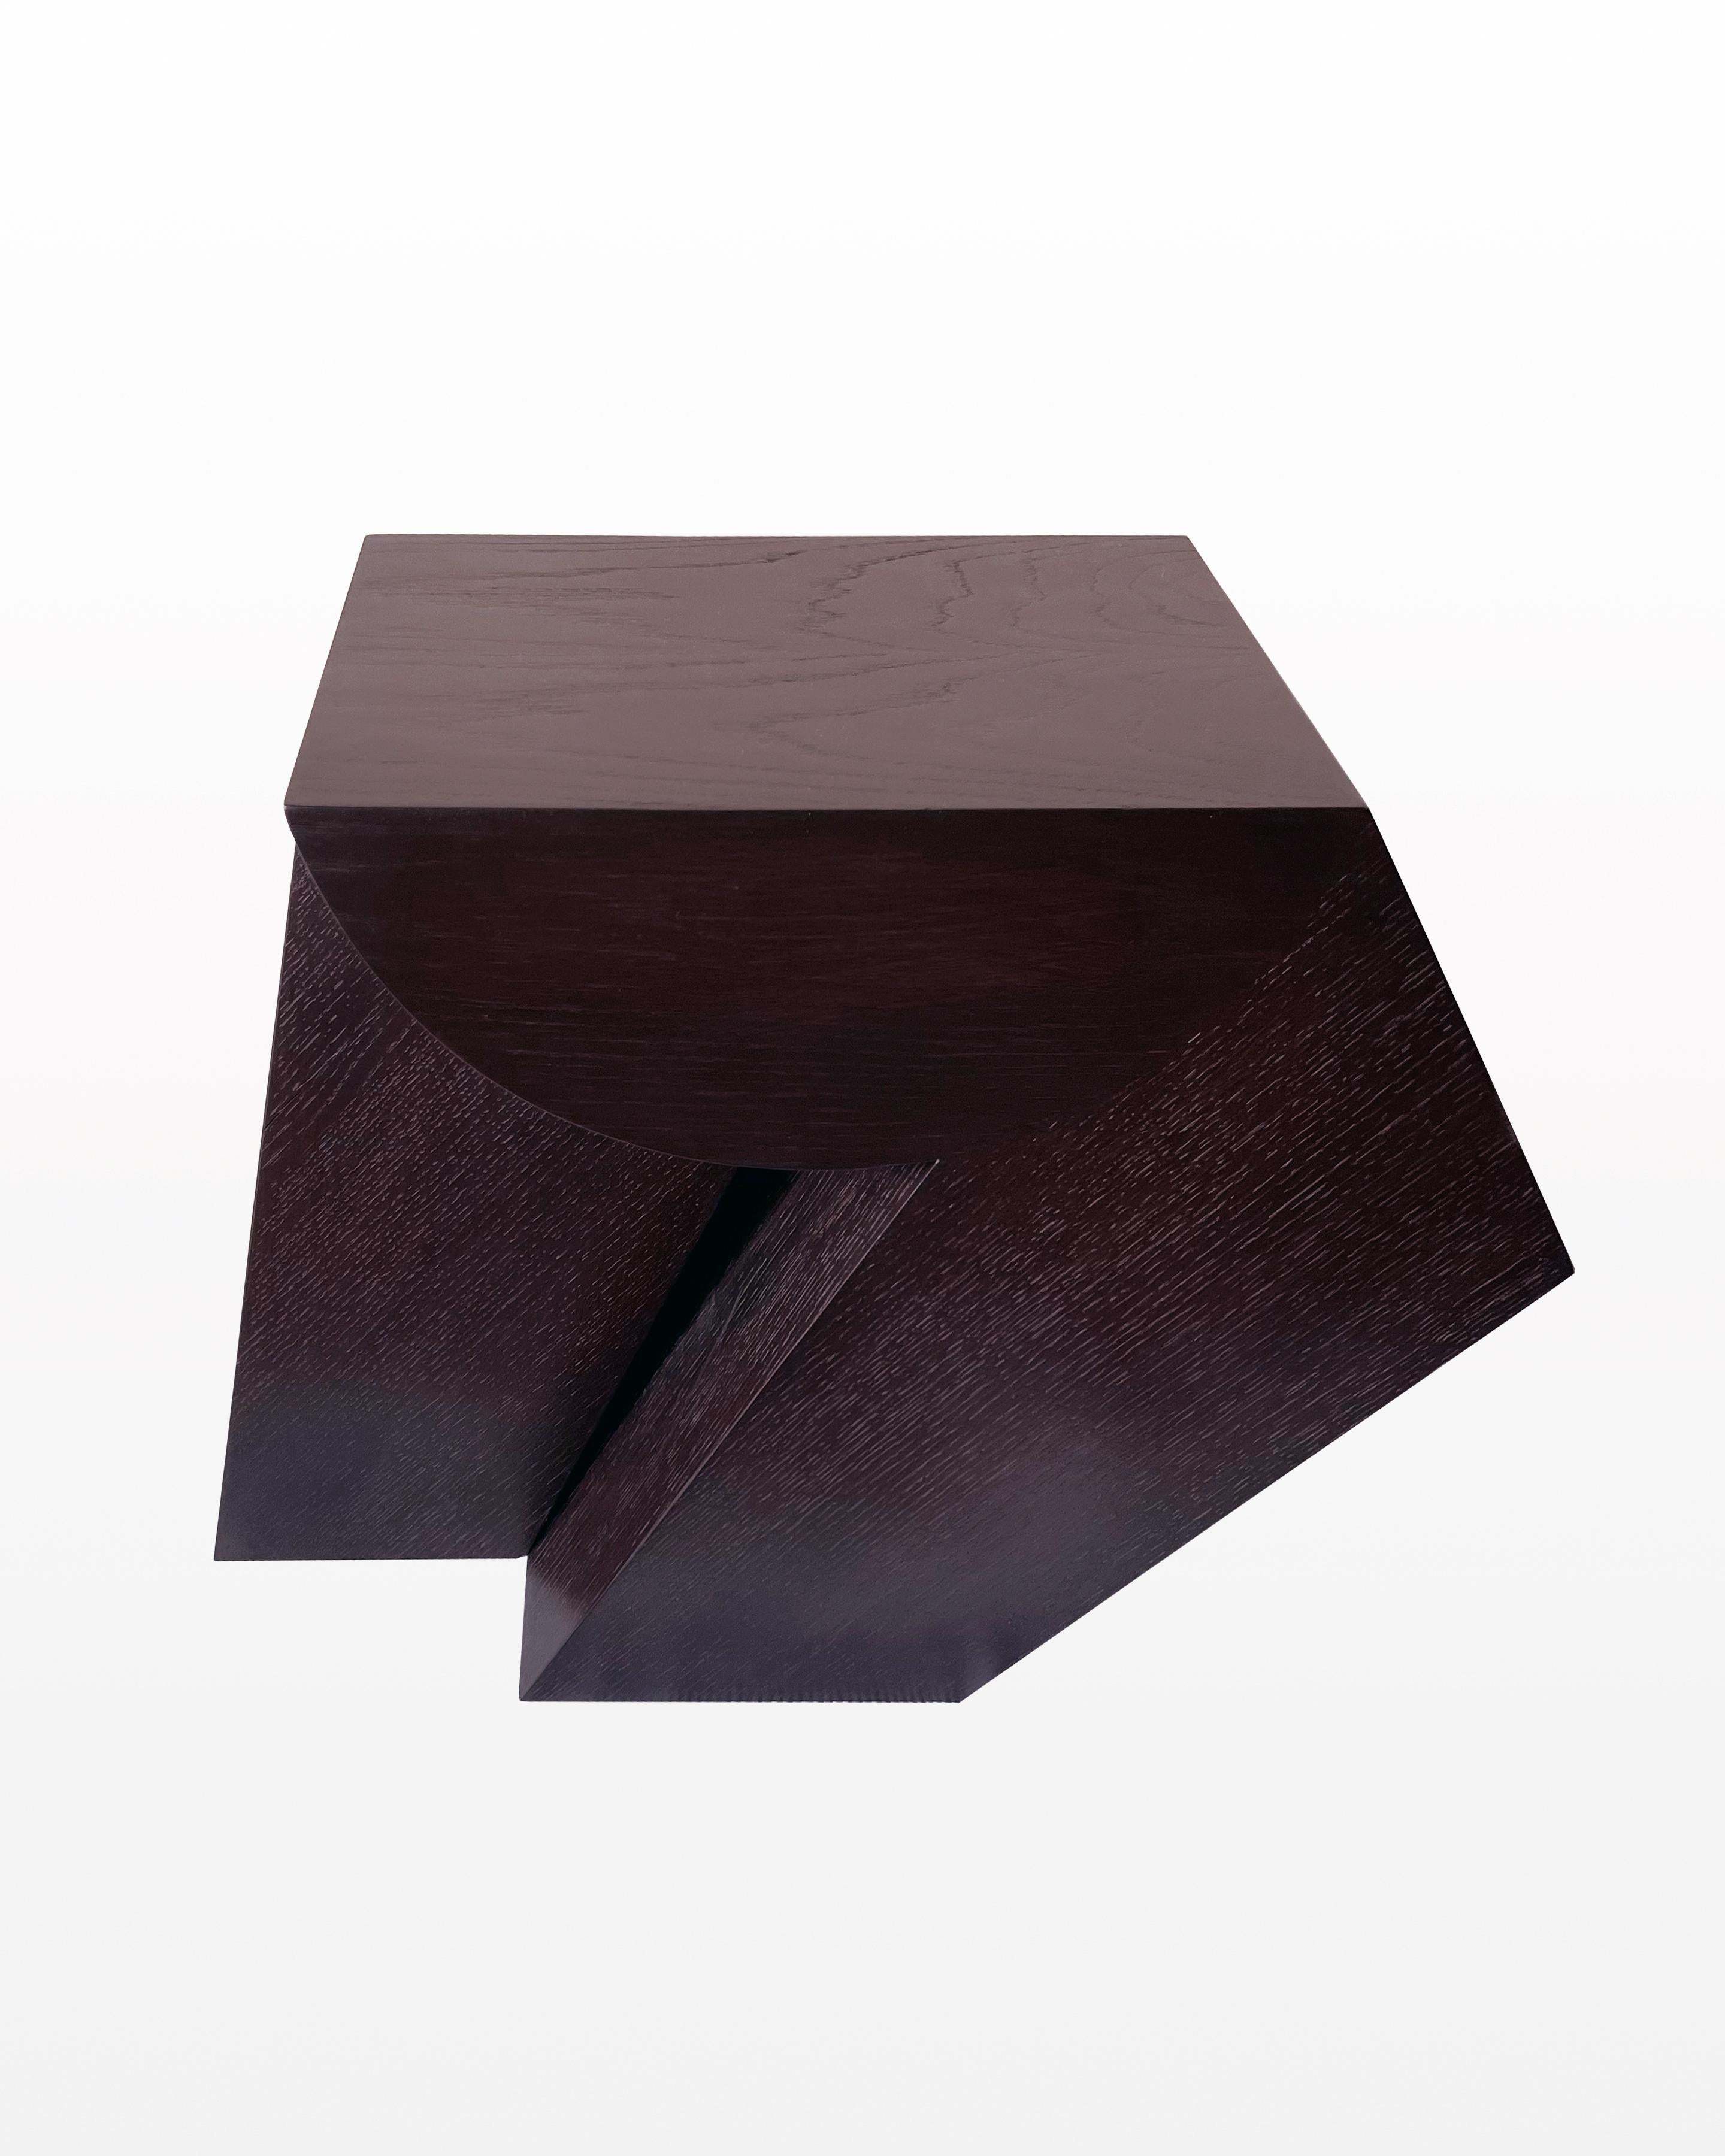 Inspired by cubism art, the Aria explores the use of geometric shapes and planes brought together in wood, to form a fragmented and multidimensional table.  